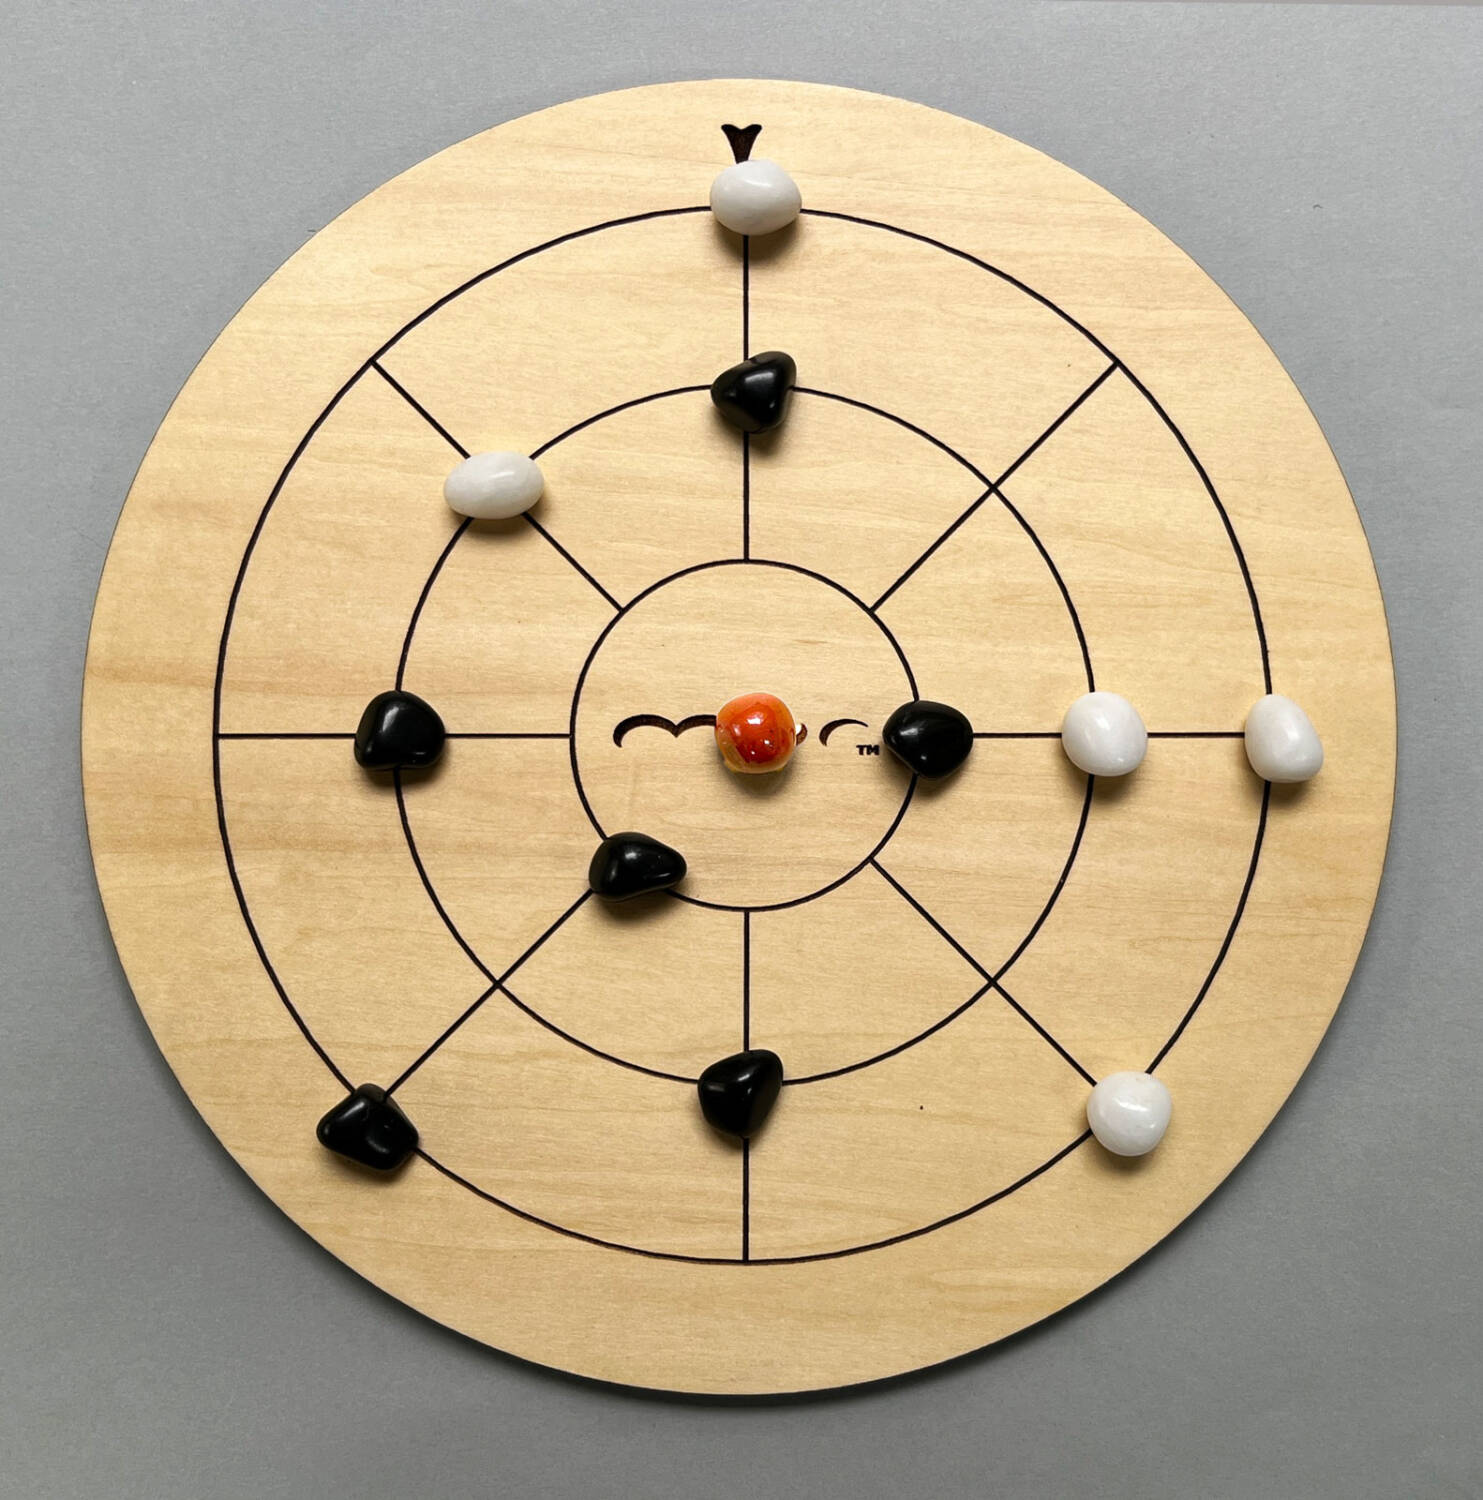 In the example illustrated above, after black won the game, the red Mur Stone would be placed in the center of the board. With the exception of the Mur Stone, the next game starts where the last game ended.